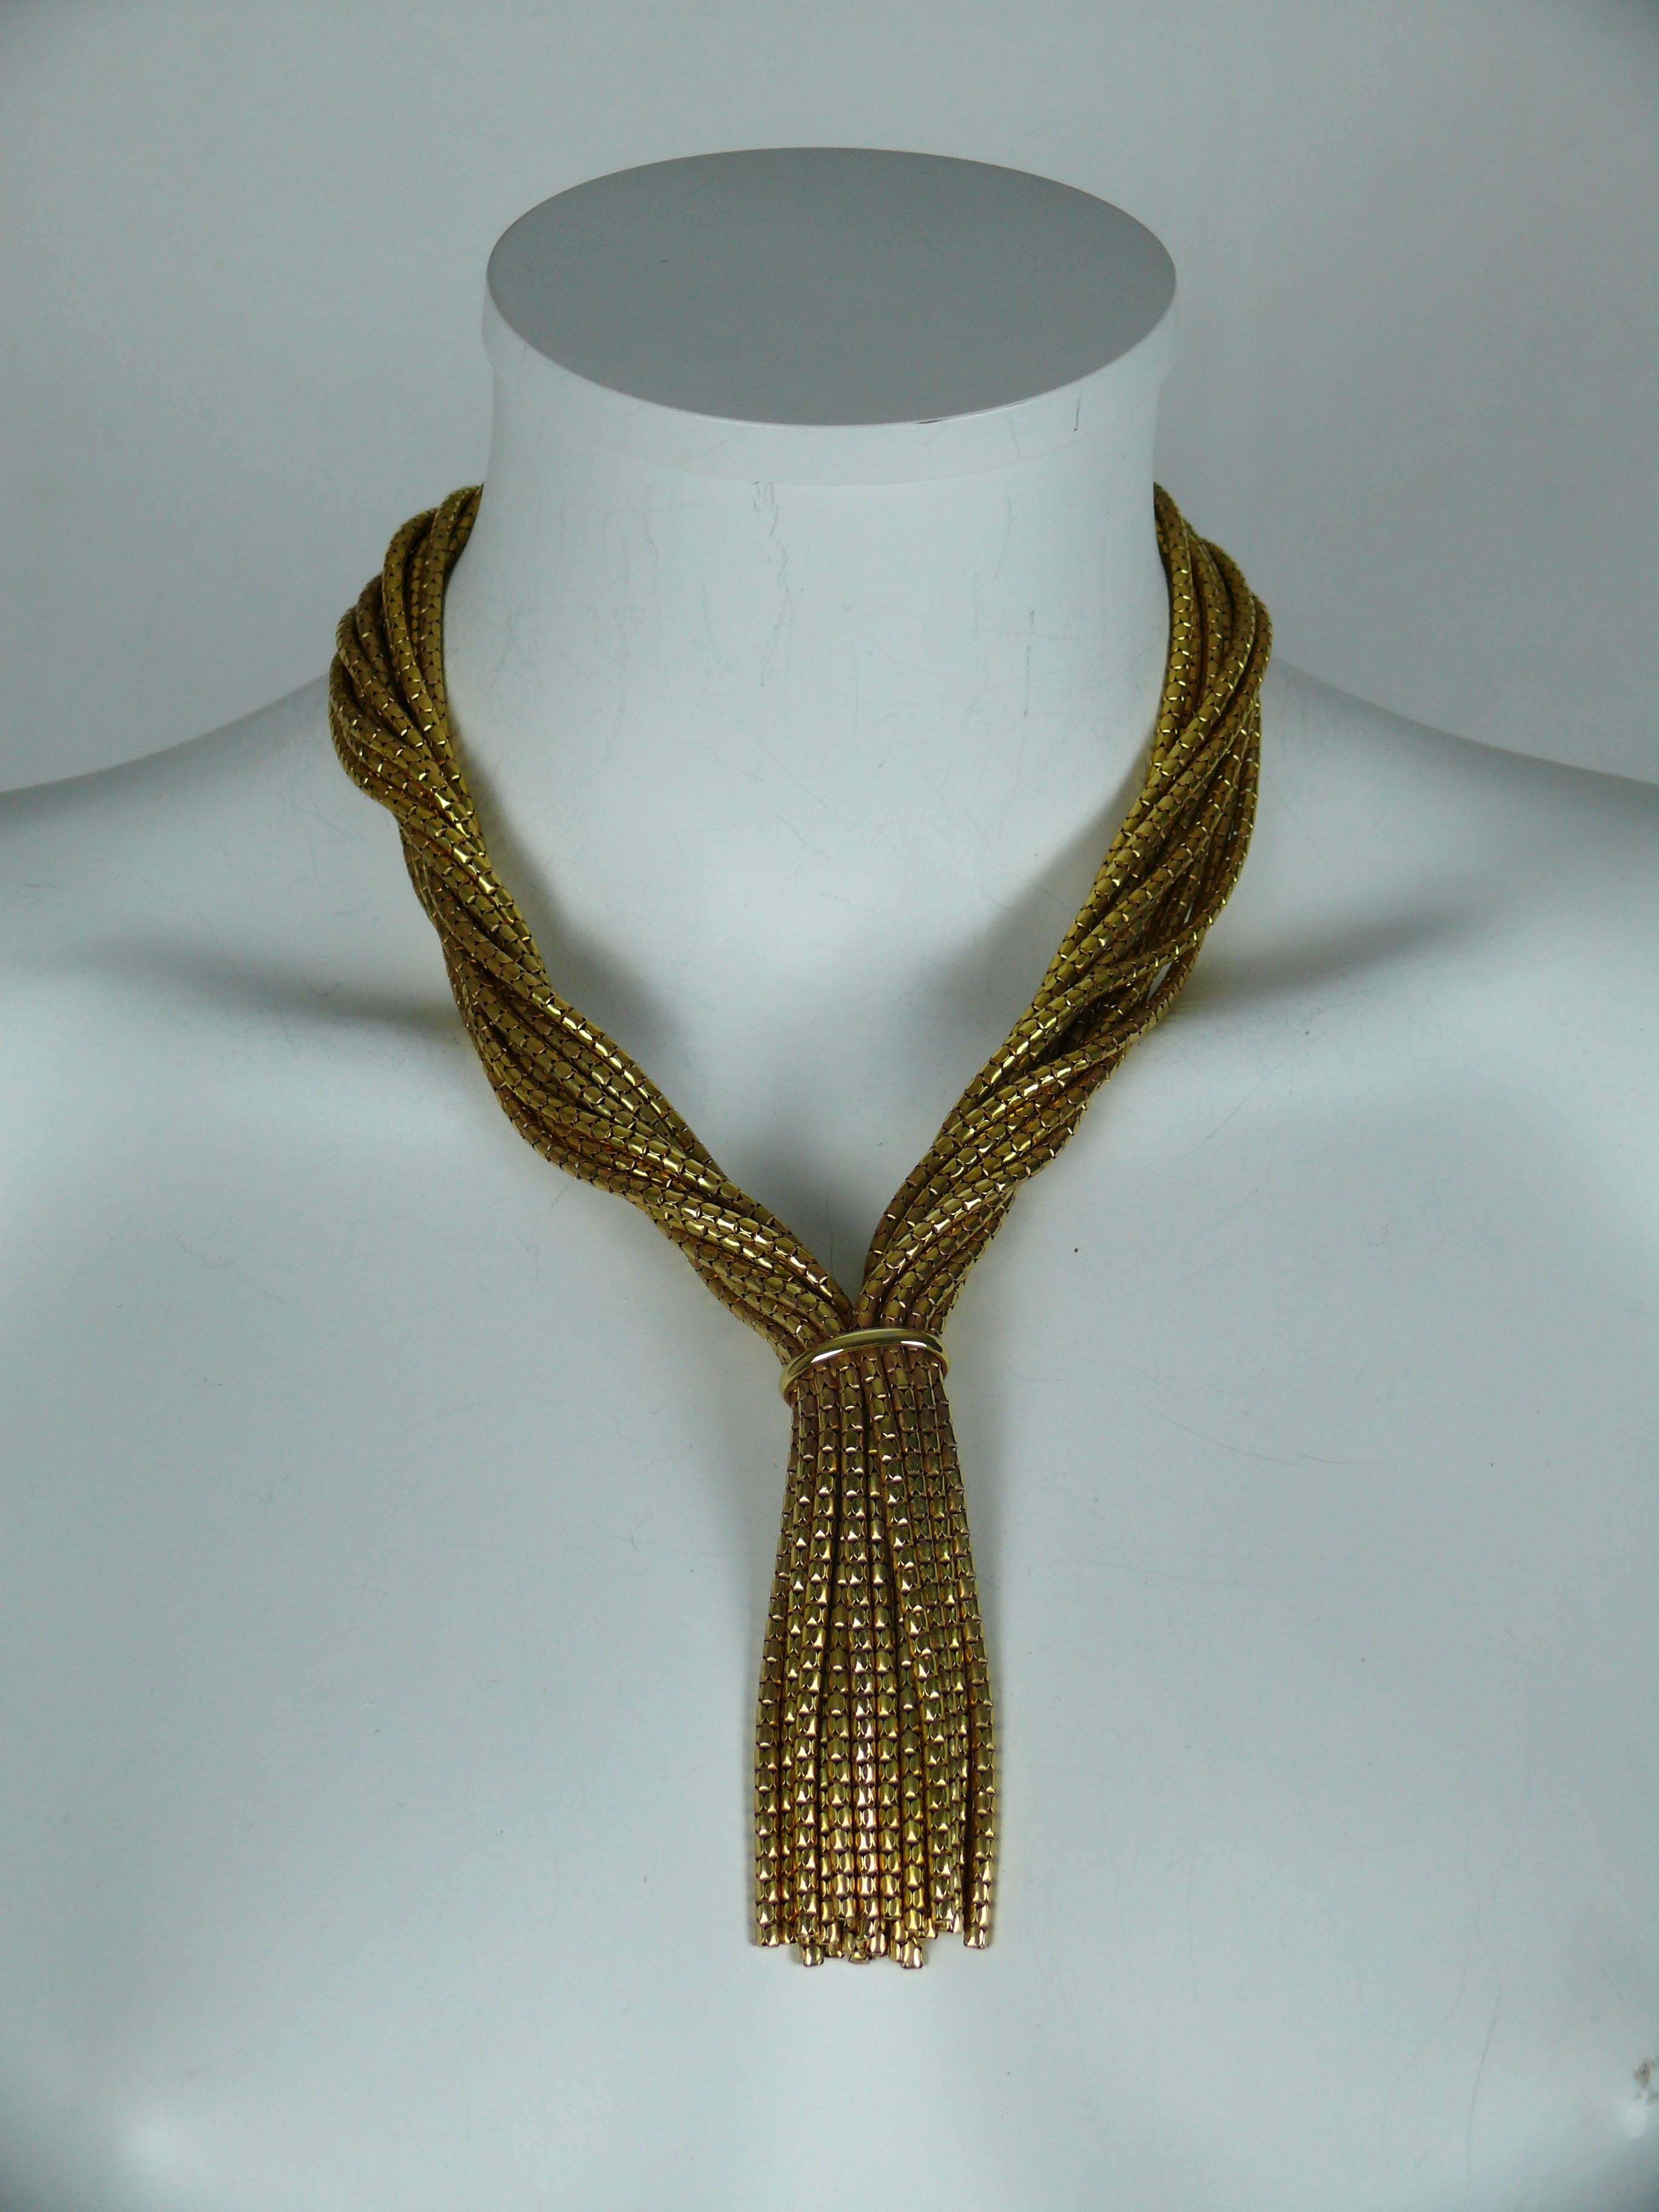 CHRISTIAN DIOR vintage gold toned twisted multi chain tassel necklace.

All chains cluster together and meet at a chunky hidden push clasp.

Embossed CHR. DIOR Germany.
Dated 1967.

Comes with original box (in vintage condition).

JEWELRY CONDITION